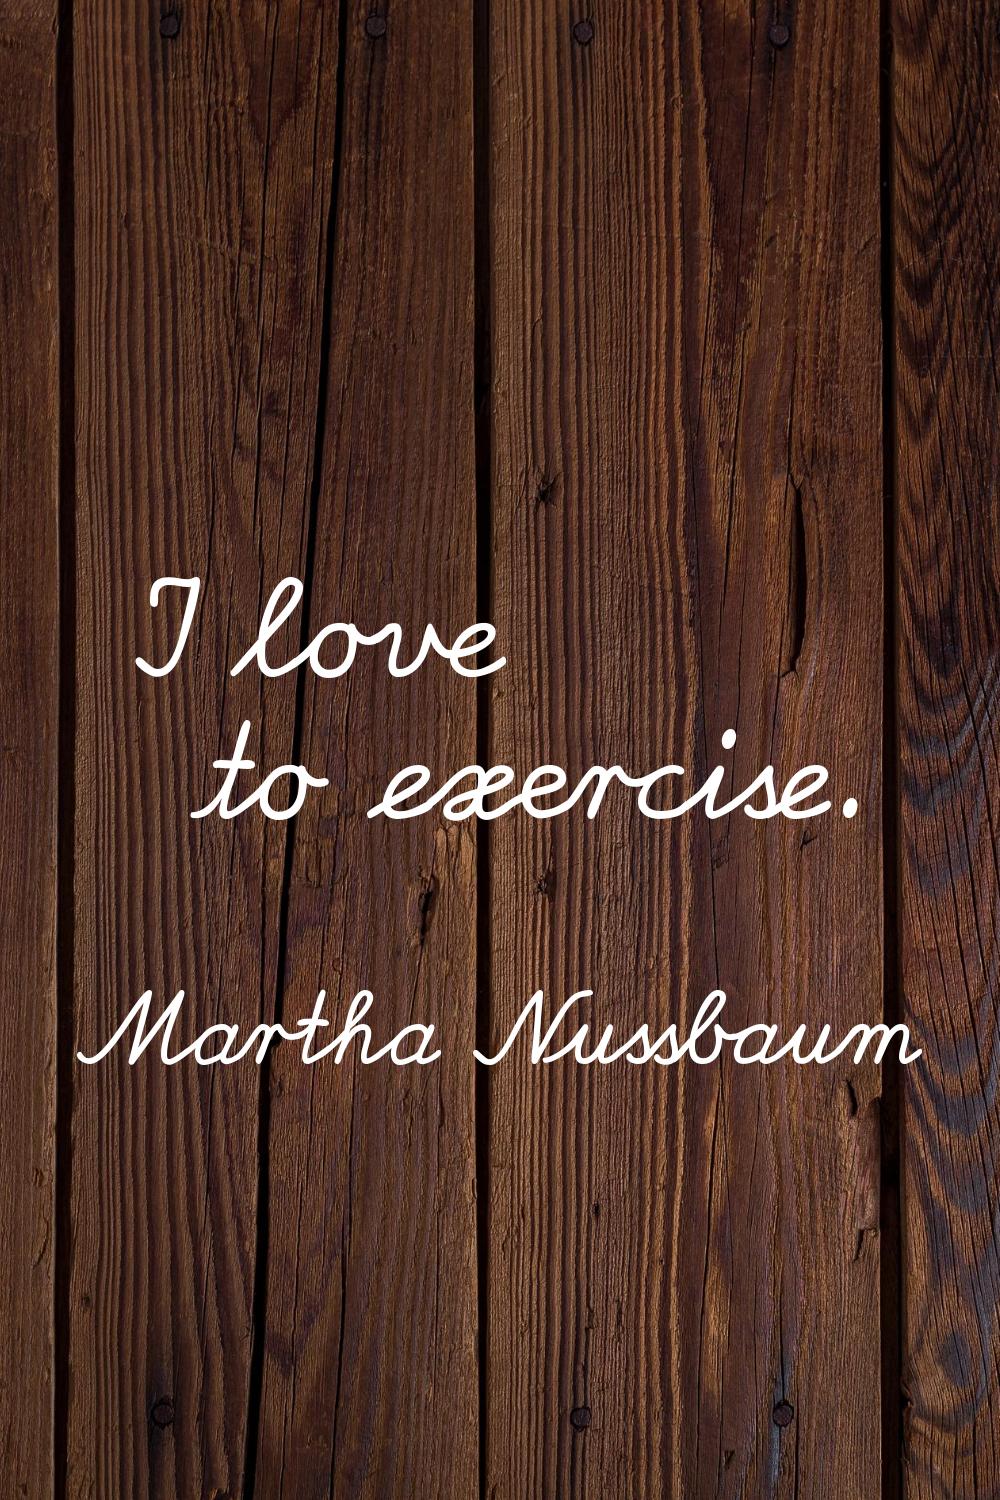 I love to exercise.